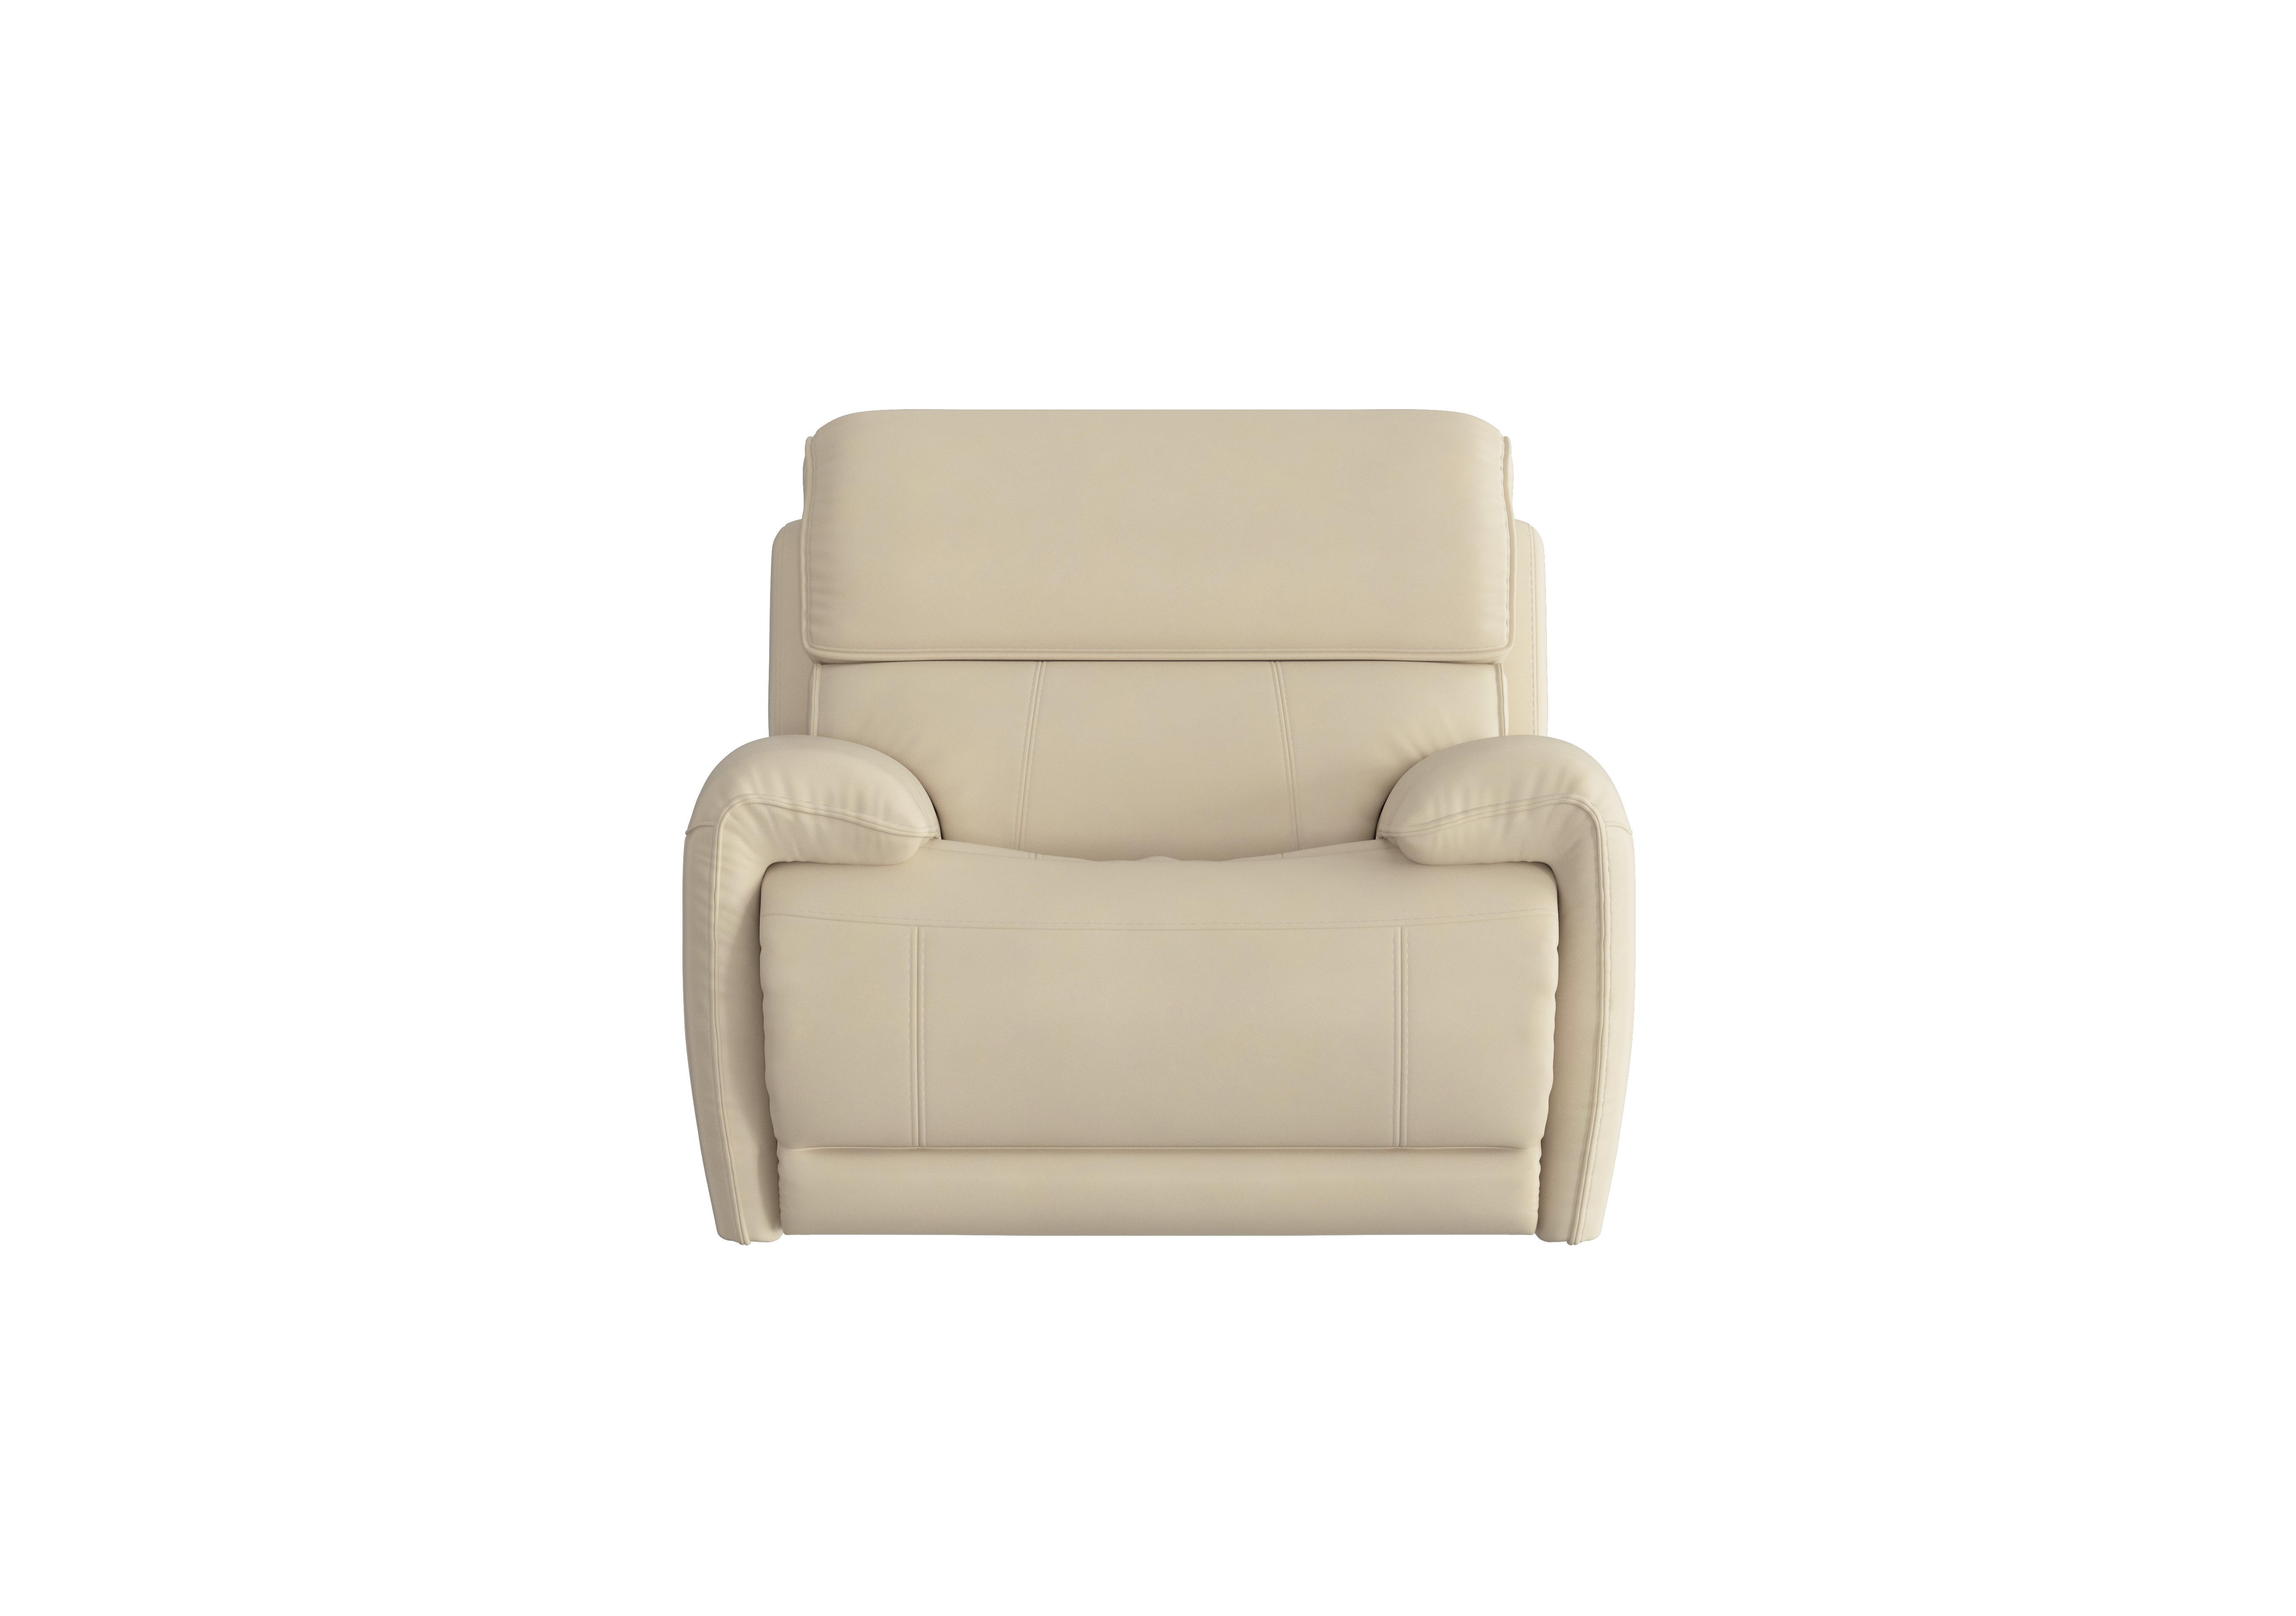 Link Leather Power Recliner Armchair with Power Headrest in Bv-862c Bisque on Furniture Village